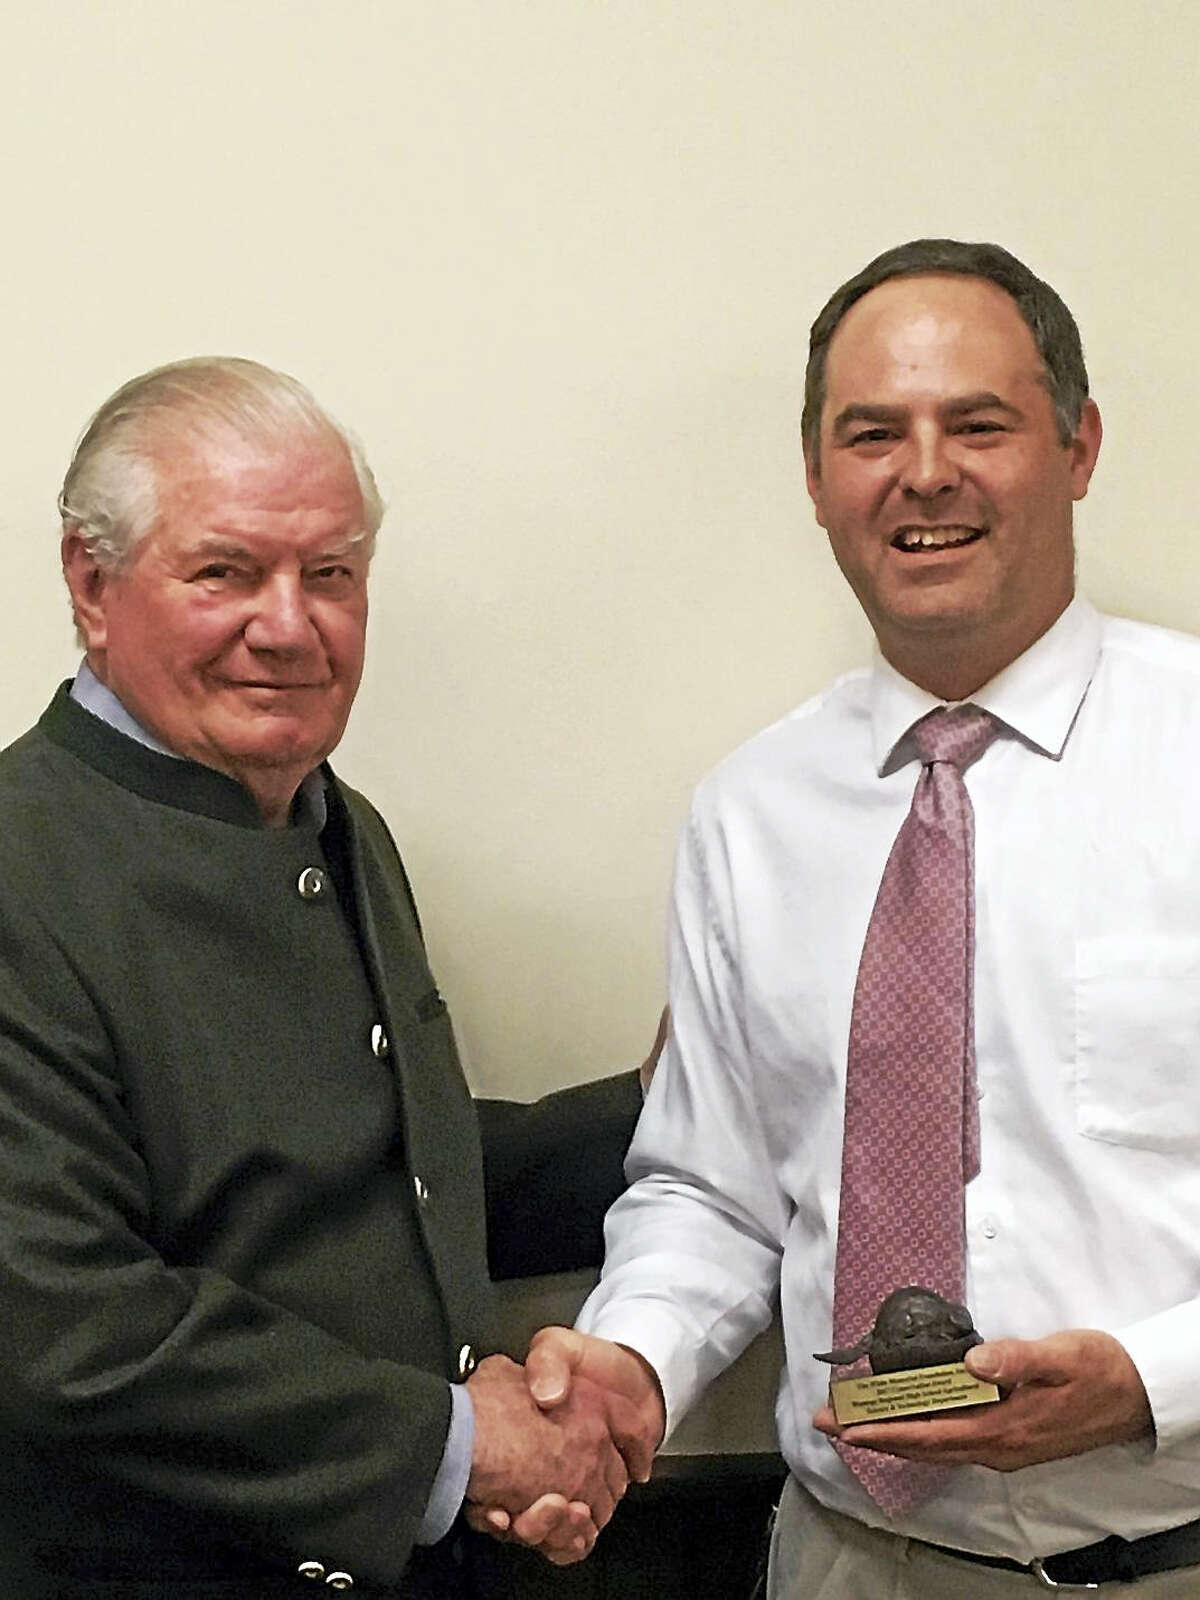 White Memorial Foundation board president Aurthur Diedrick, left, presents the White Memorial Foundation’s Conservation Award to Christopher Brittain, Wamogo’s Agriculture Science and Technology teacher.